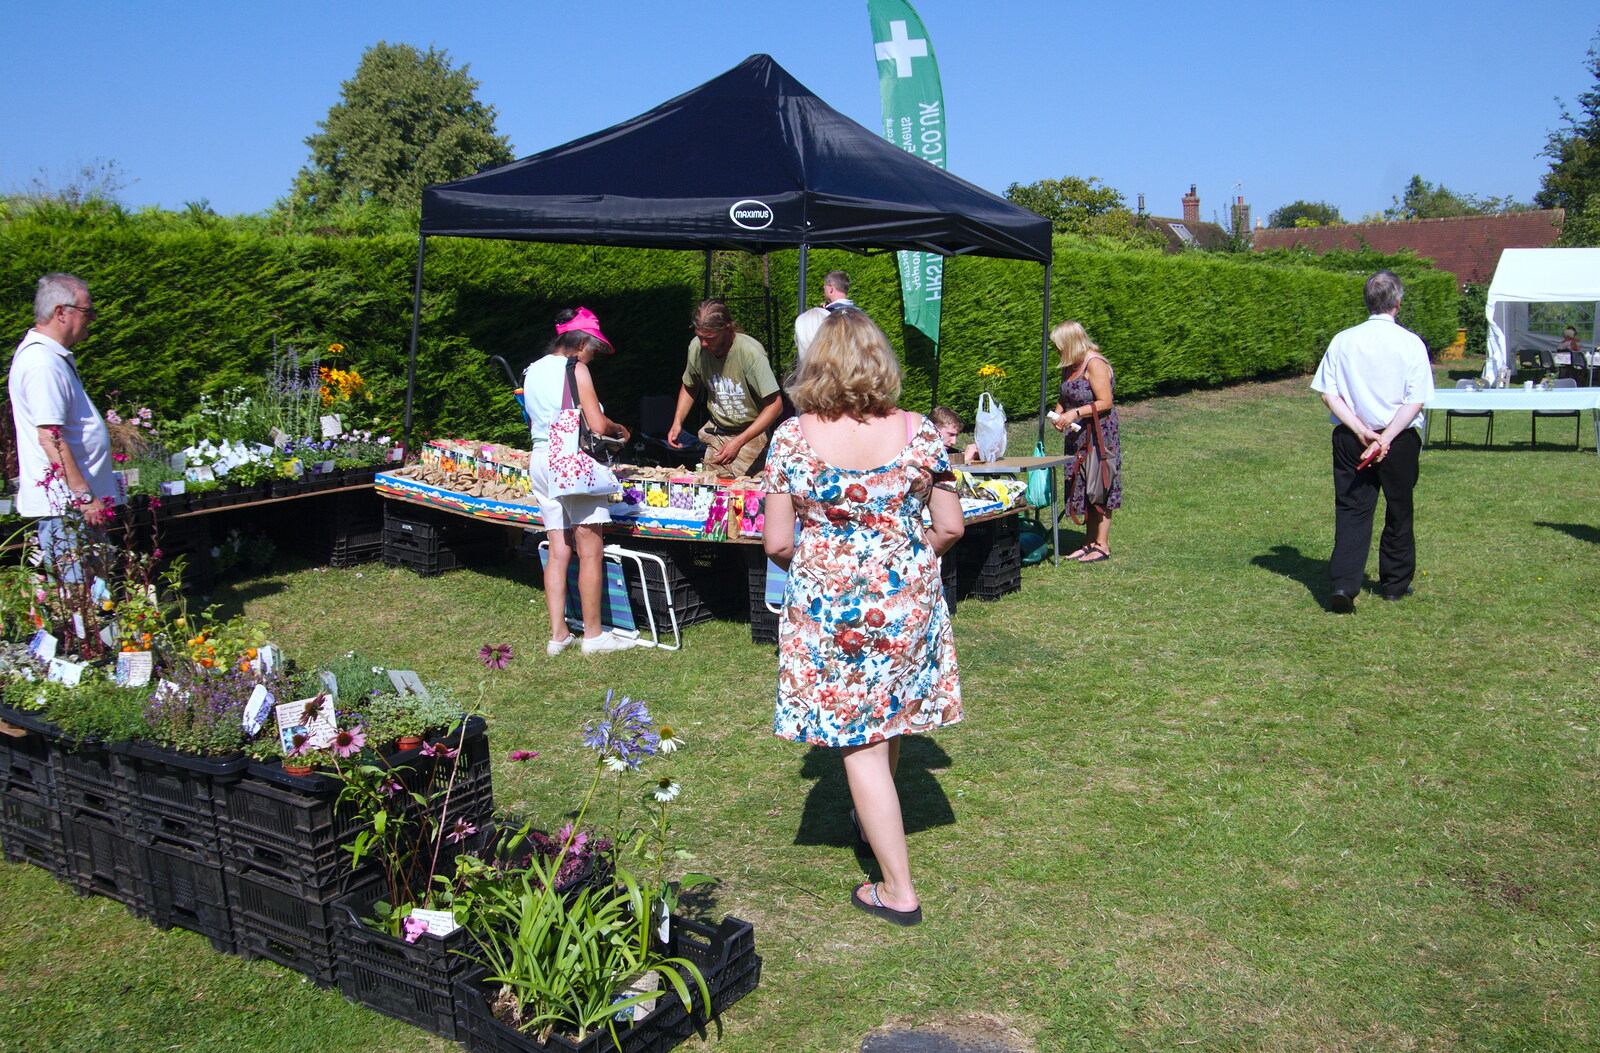 Some plant sales occur in the garden from The Gislingham Silver Band at Walsham Le Willows, Suffolk - 26th August 2019